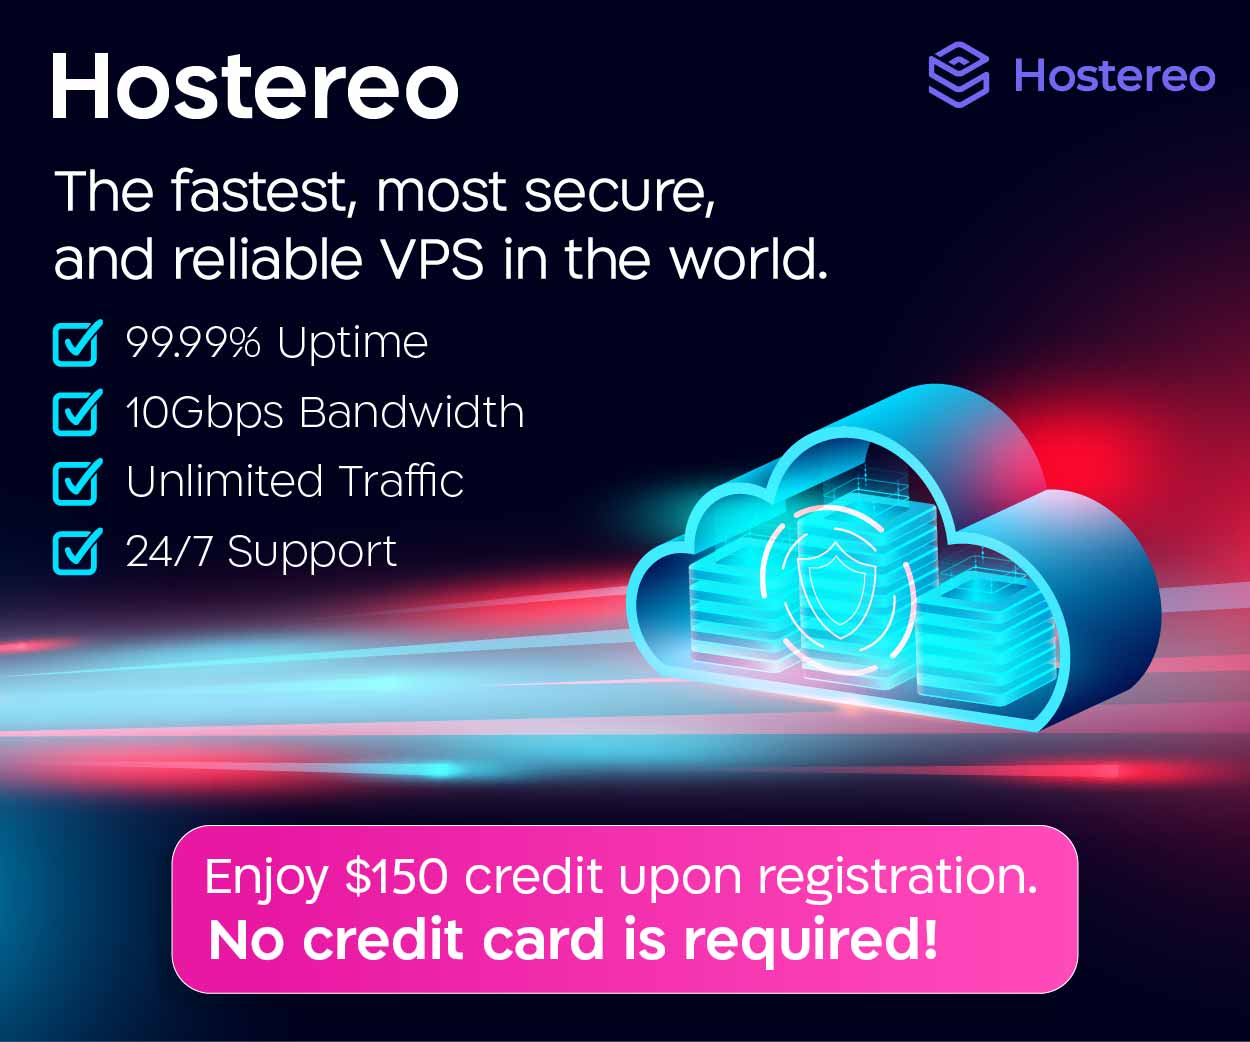 Elevate your business with Hostereo's lightning-fast, ultra-reliable cloud hosting.